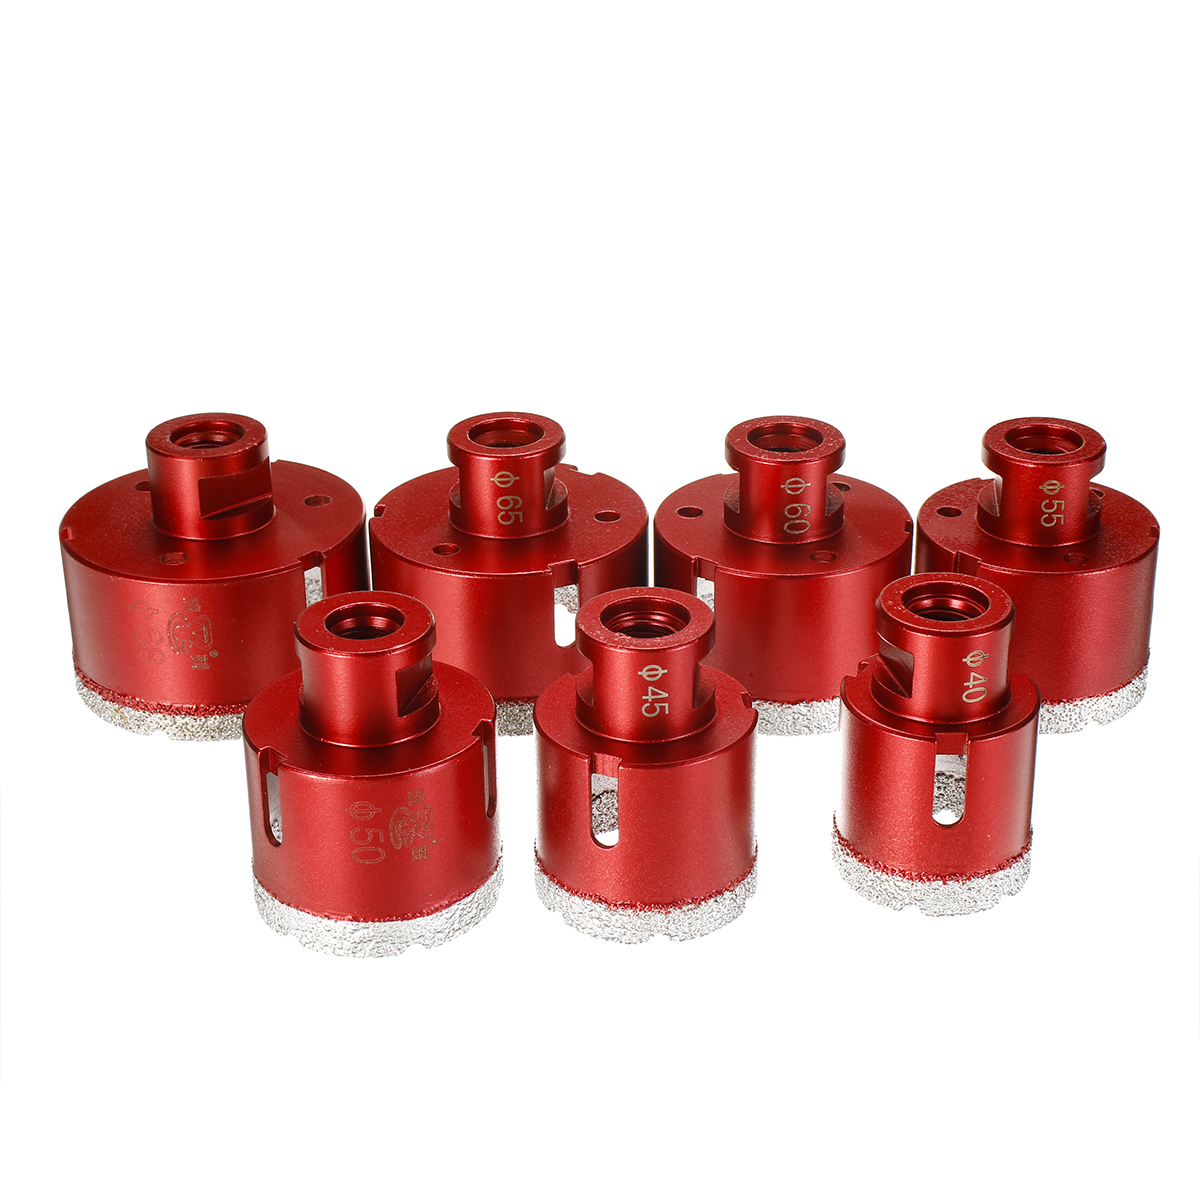 40-68mm-Diamond-Drill-Core-Bits-Drilling-Hole-Saw-Cutter-for-Tile-Marble-Granite-Stone-1551792-1